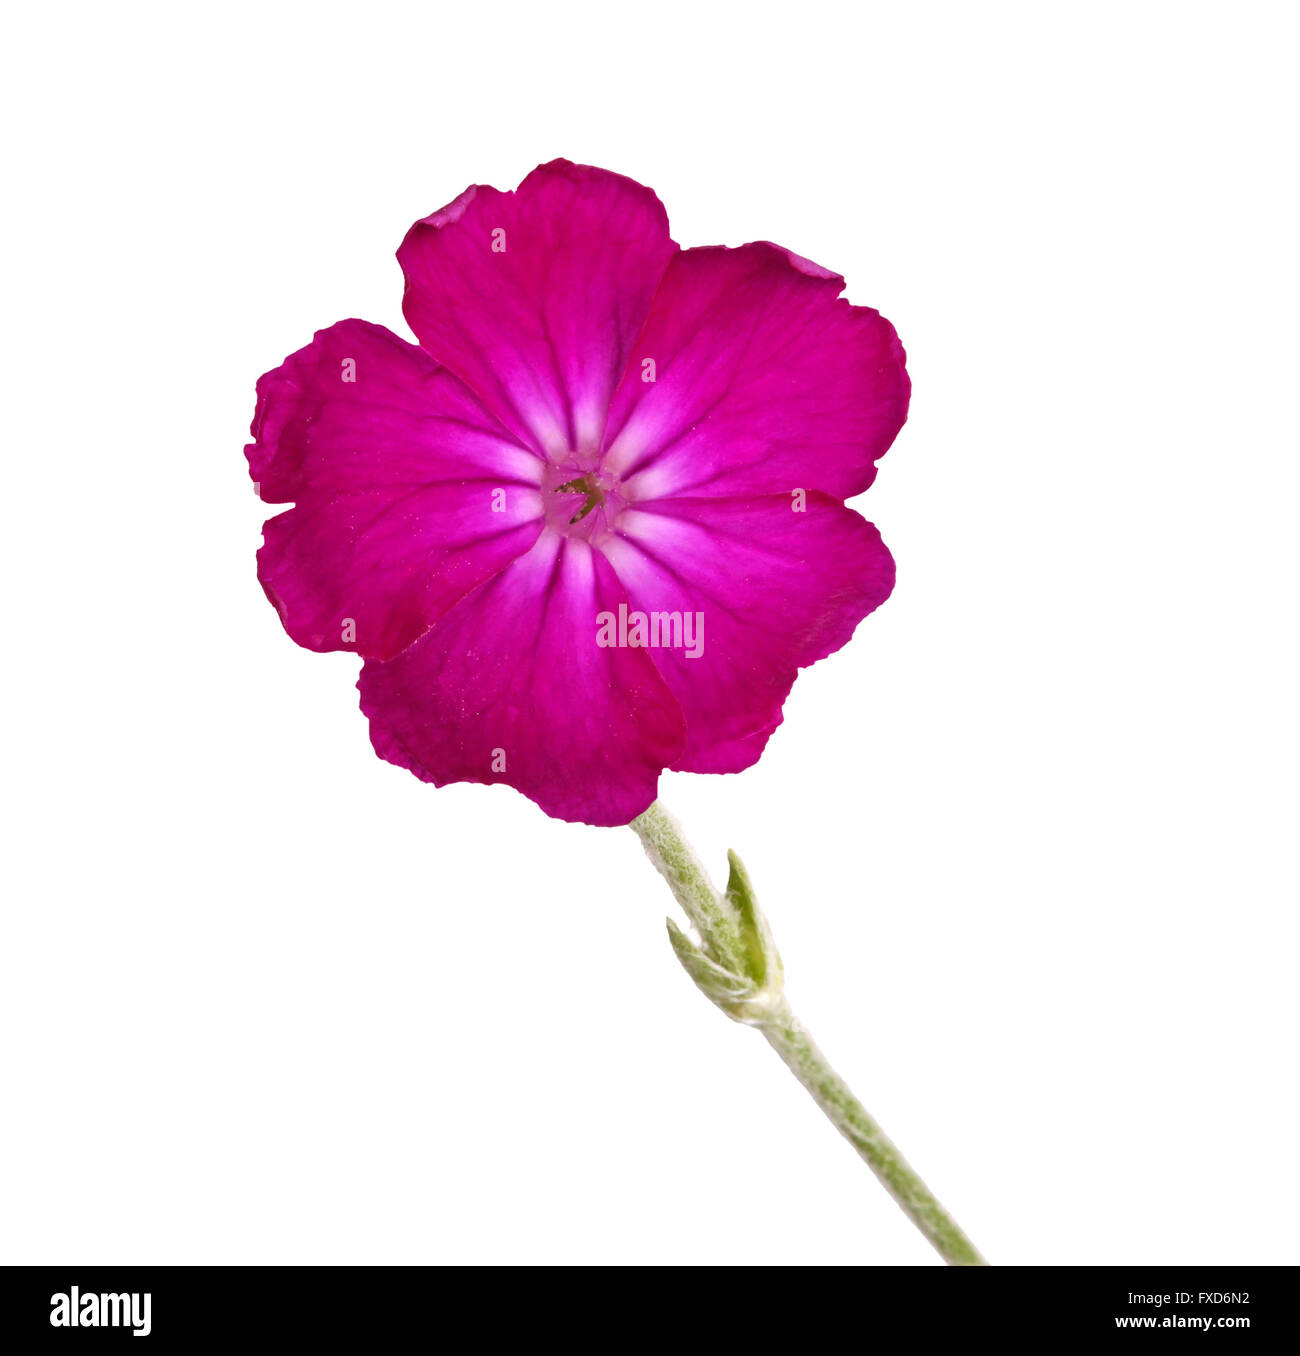 Dark purple Lychnis or rose campion flower isolated against white Stock Photo